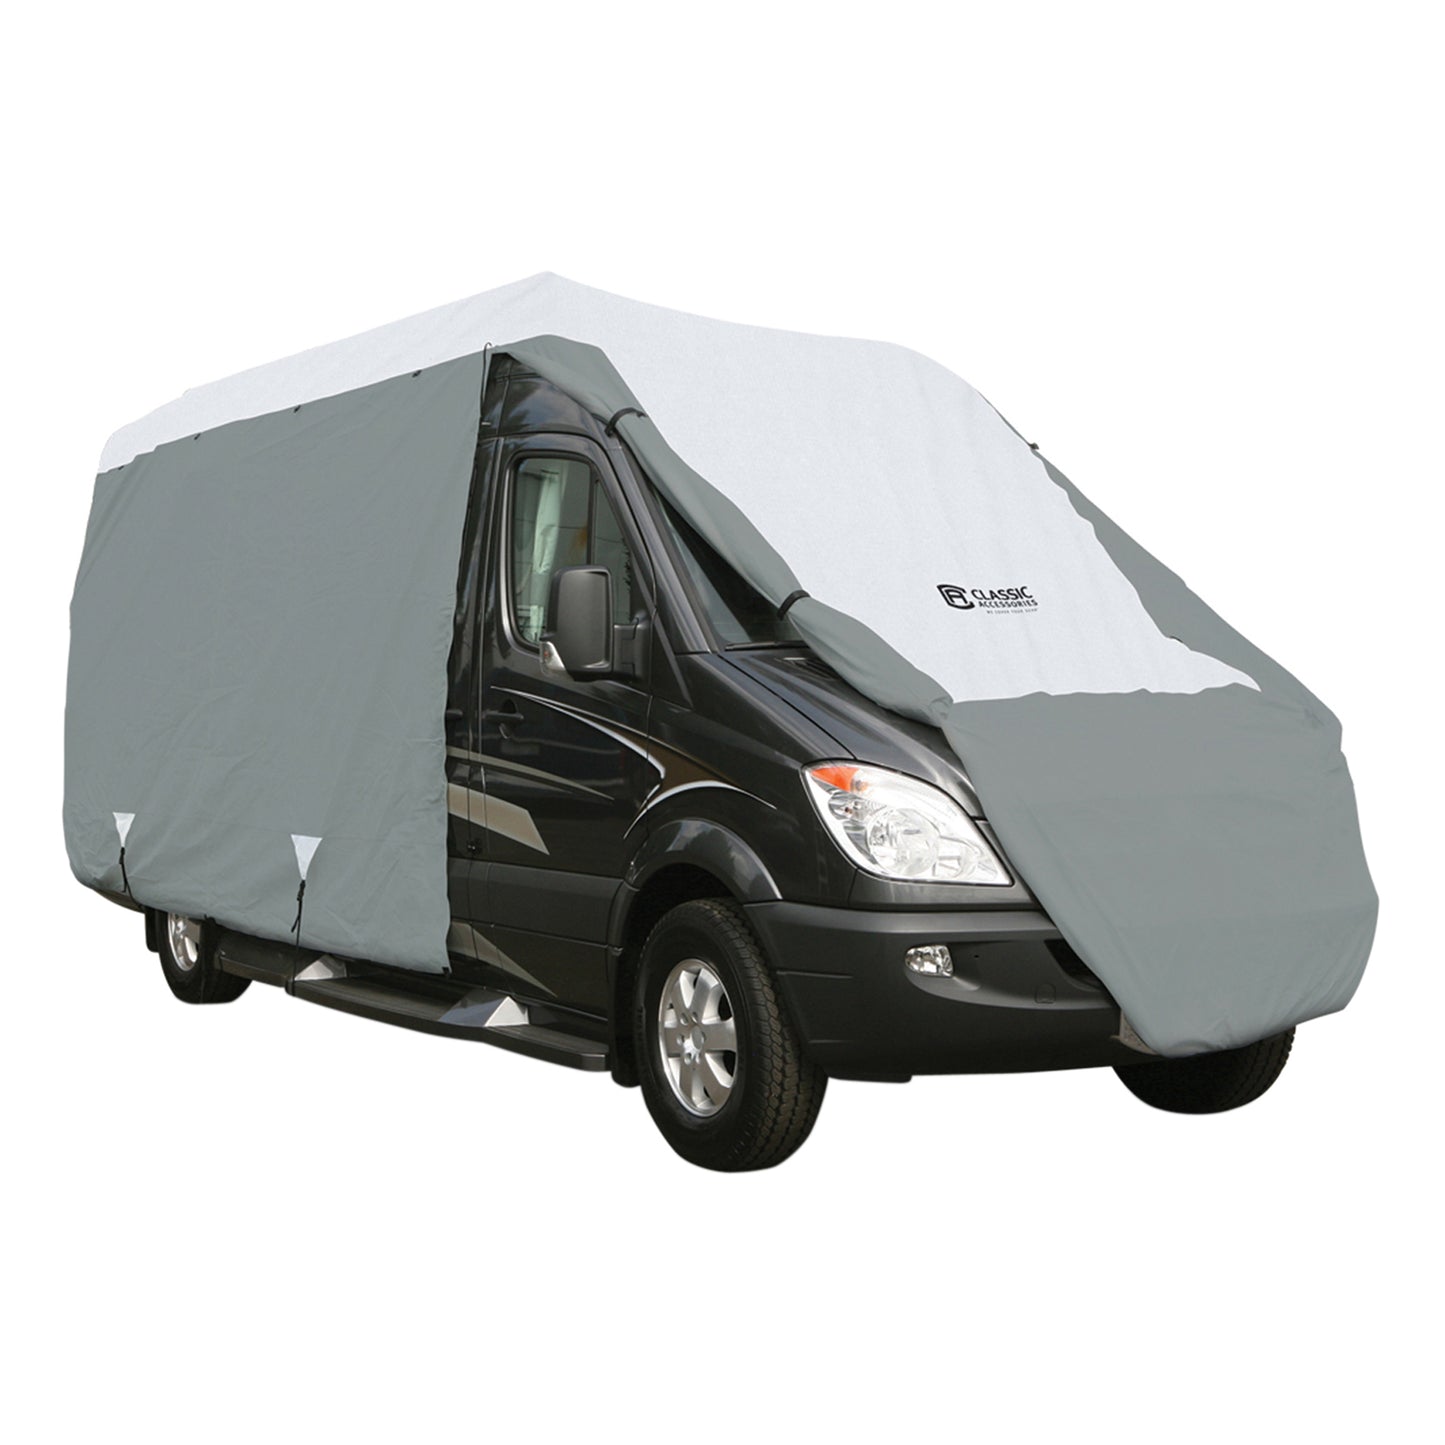 Class B RV Cover - On Sale